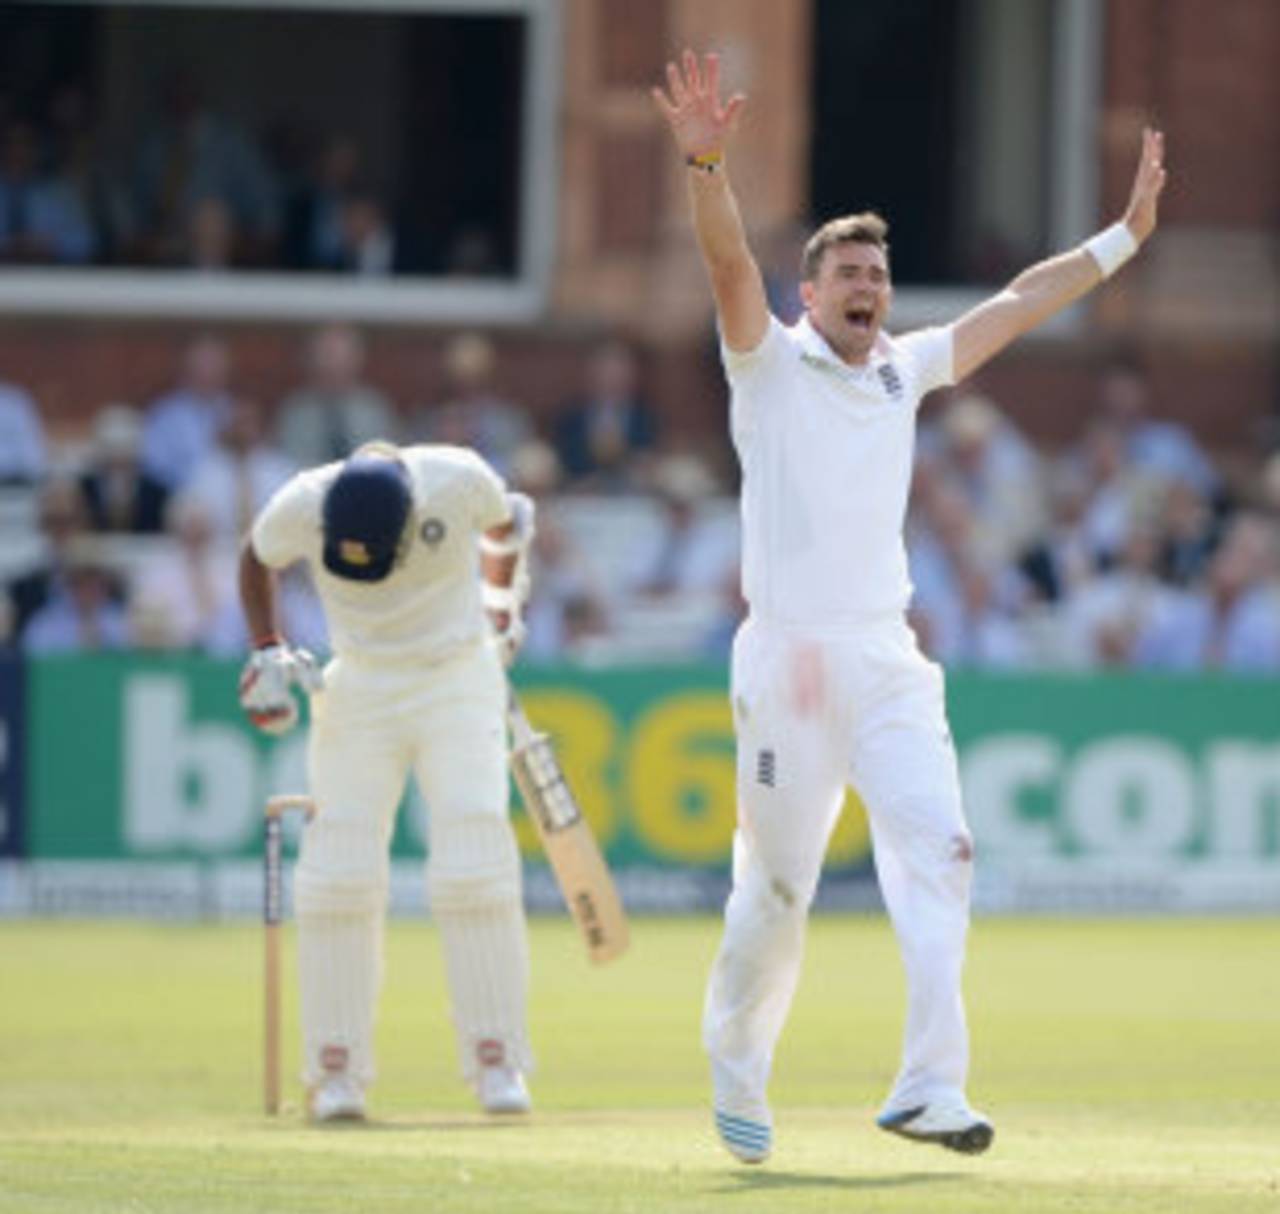 James Anderson appeals for the wicket of Stuart Binny, England v India, 2nd Investec Test, Lord's, 1st day, July 17, 2014